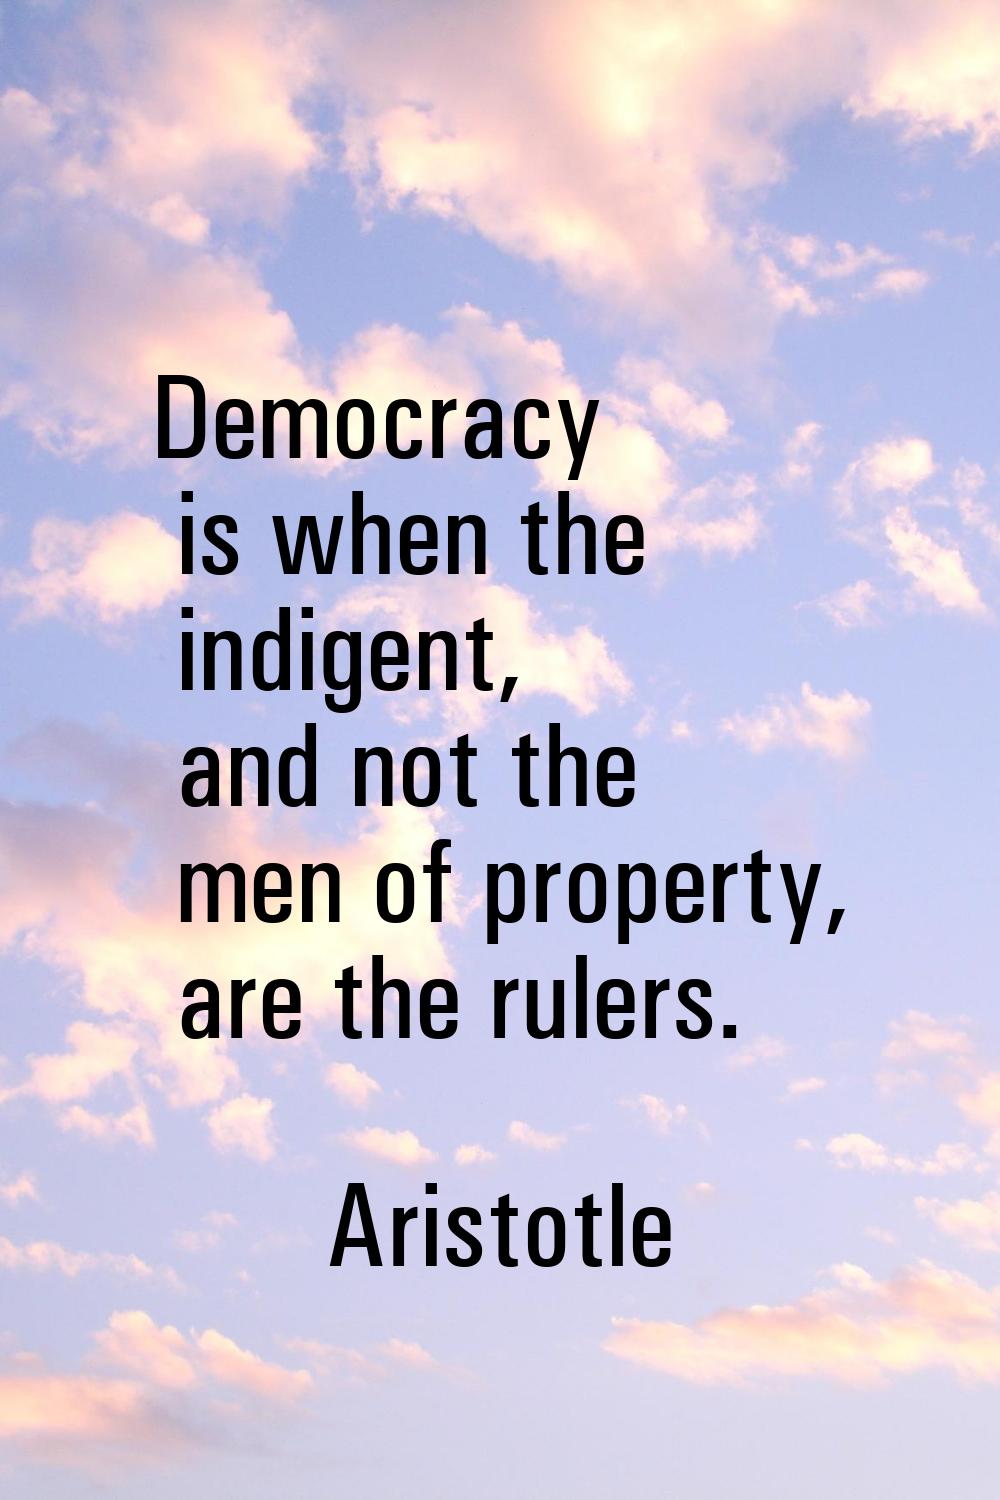 Democracy is when the indigent, and not the men of property, are the rulers.